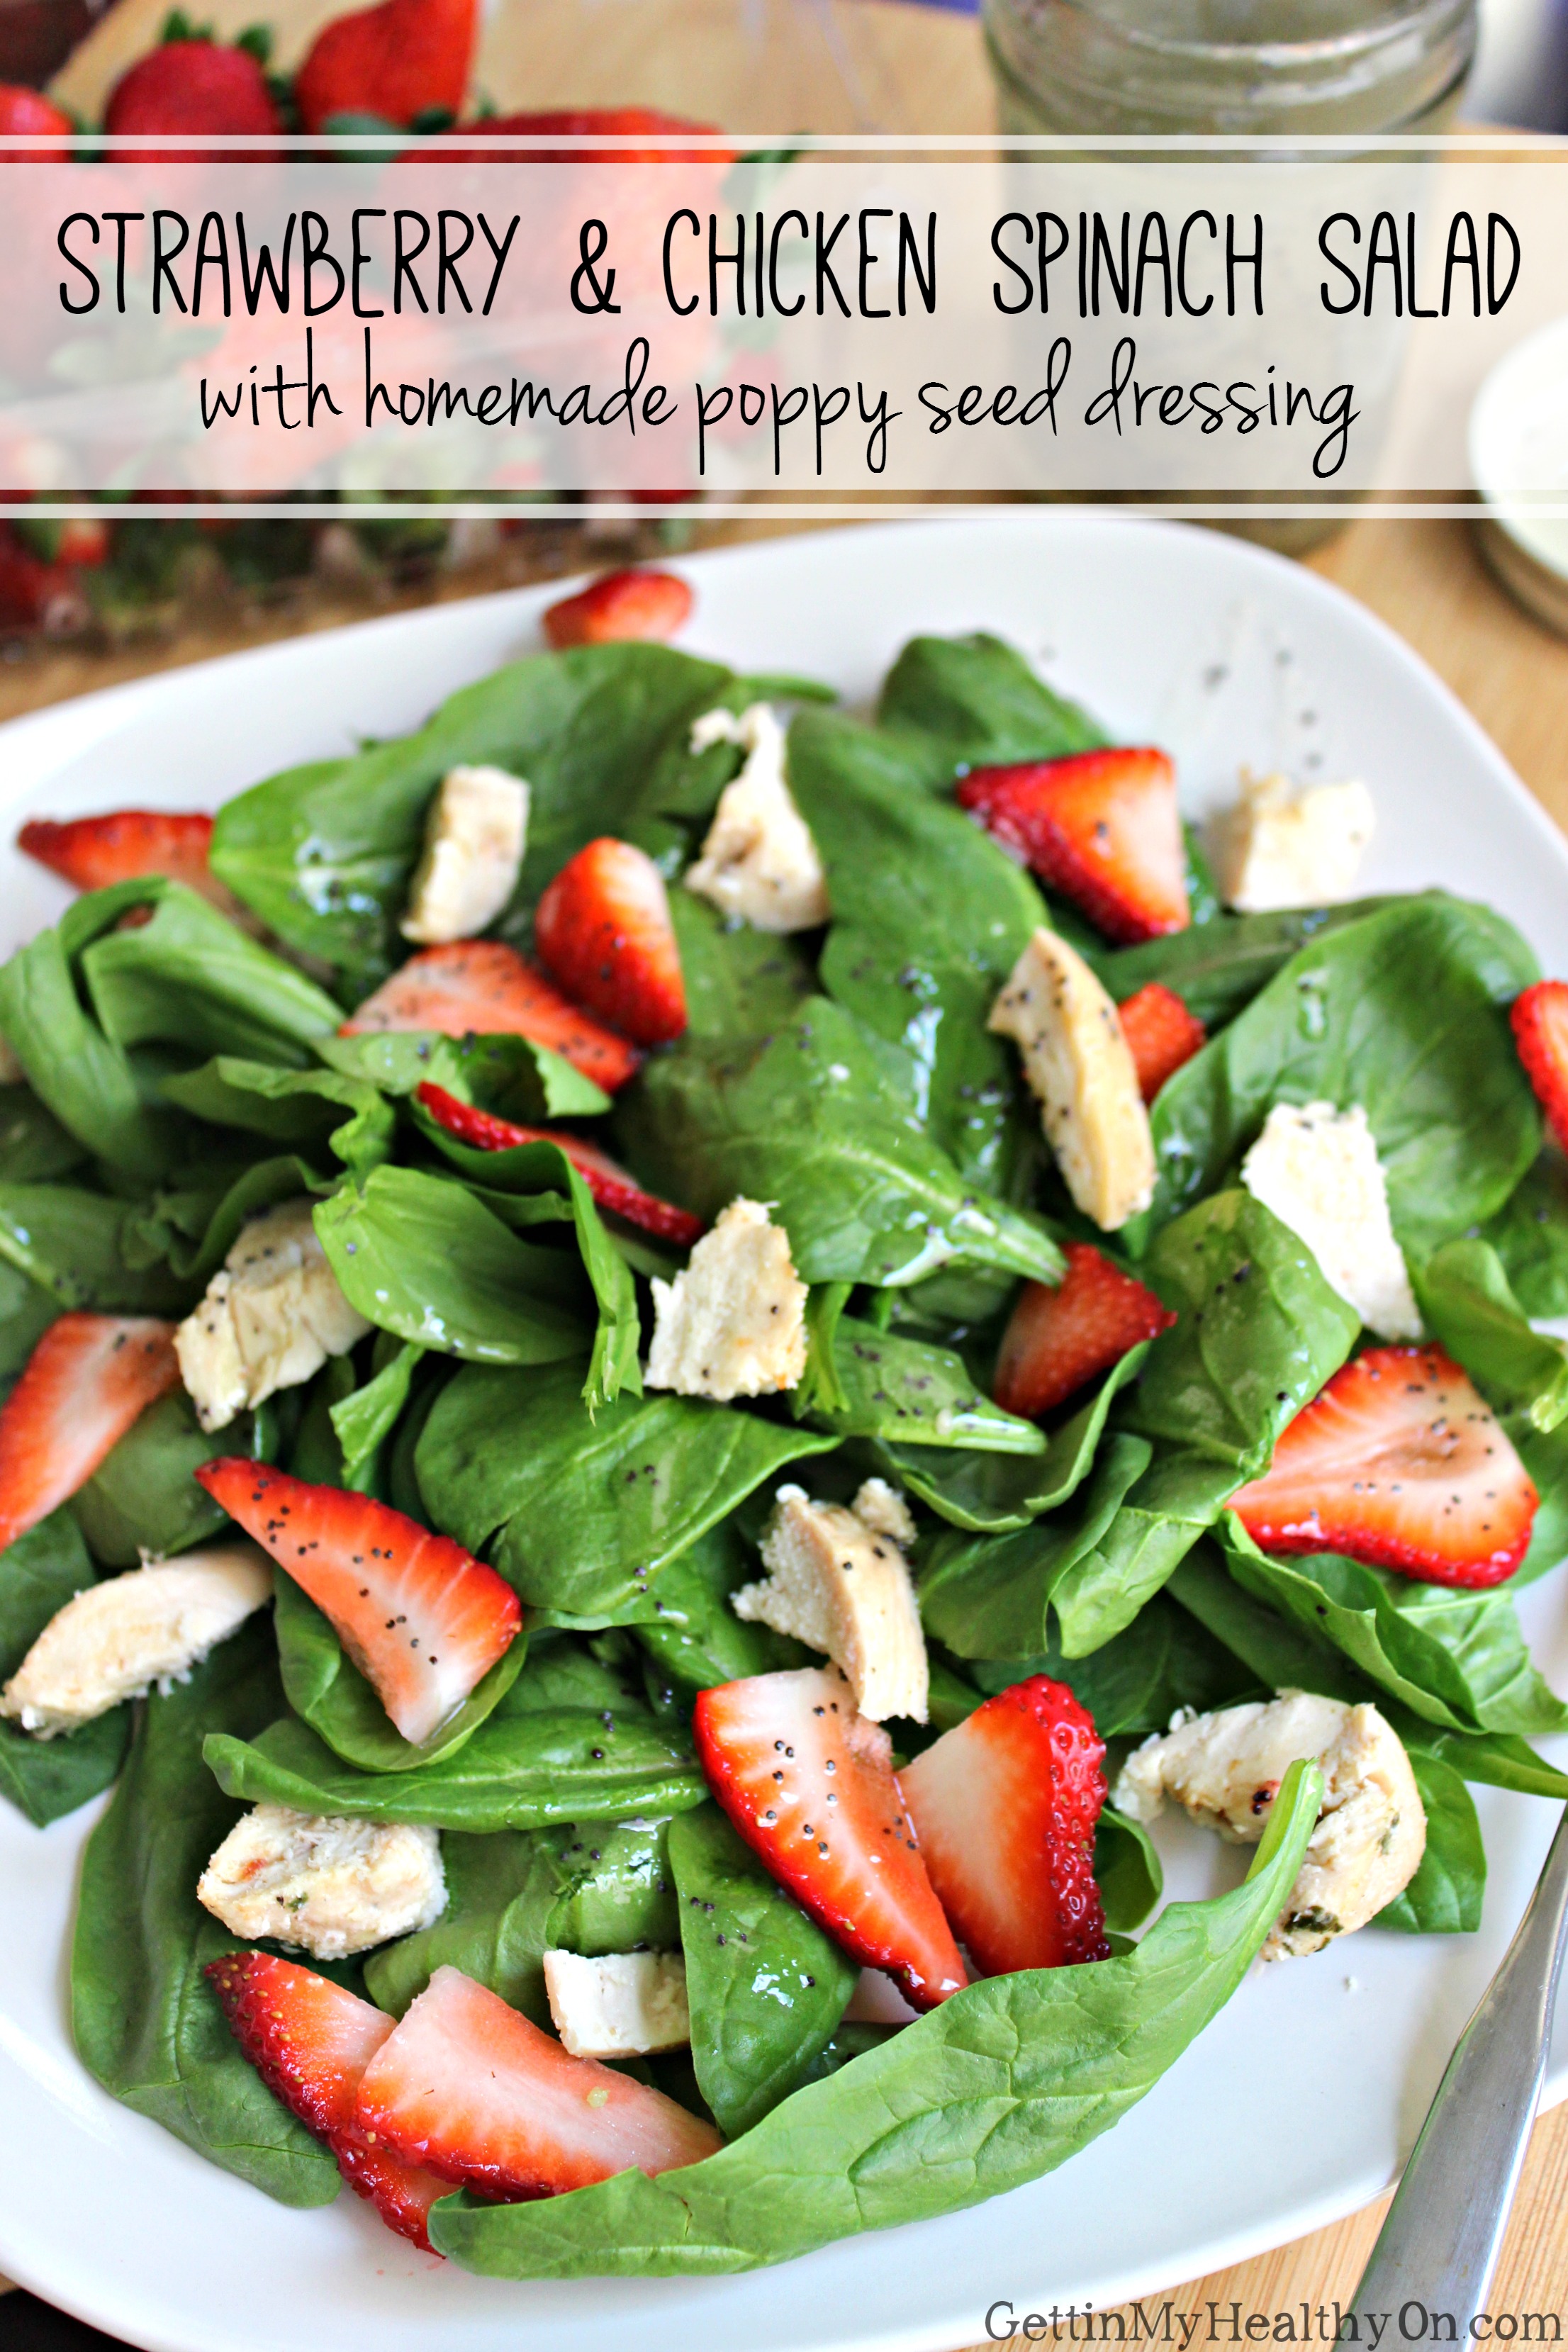 Strawberry and Chicken Spinach Salad with Poppy Seed Dressing